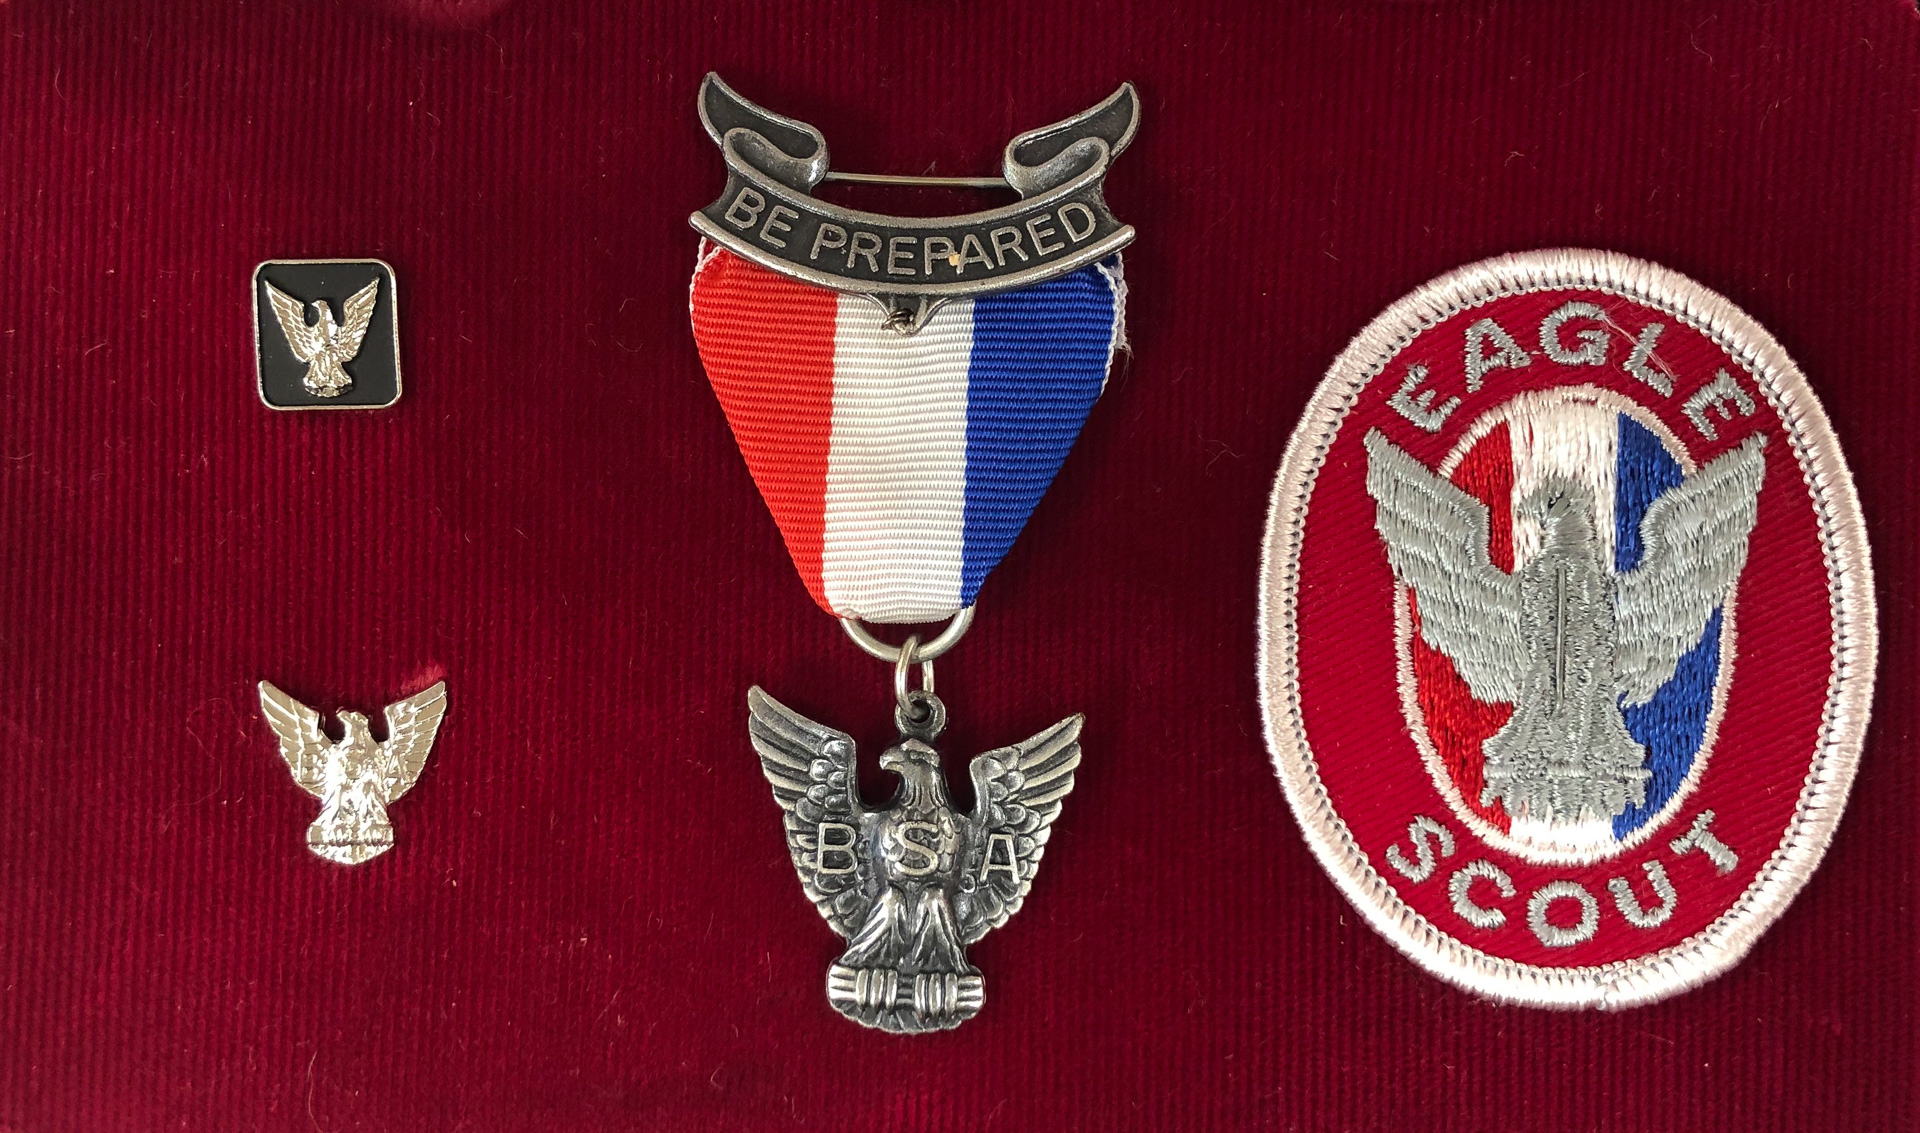 Included in this kit: Eagle tie tack, Mother's pin, Eagle award medal, and Eagle badge. The badge is worn on the left shirt pocket. There are seven ranks achievable by Scouts: Scout, Tenderfoot, Second Class, First Class, Star, Life, and Eagle. With Eagle being the highest attainable rank. In order to attain the rank of Eagle a Scout must earn a minimum of 21 merit badges, 13 of which are required by all Scouts. Since 1969, a silver border outlines the required 13 badges to distinguish them from the rest.